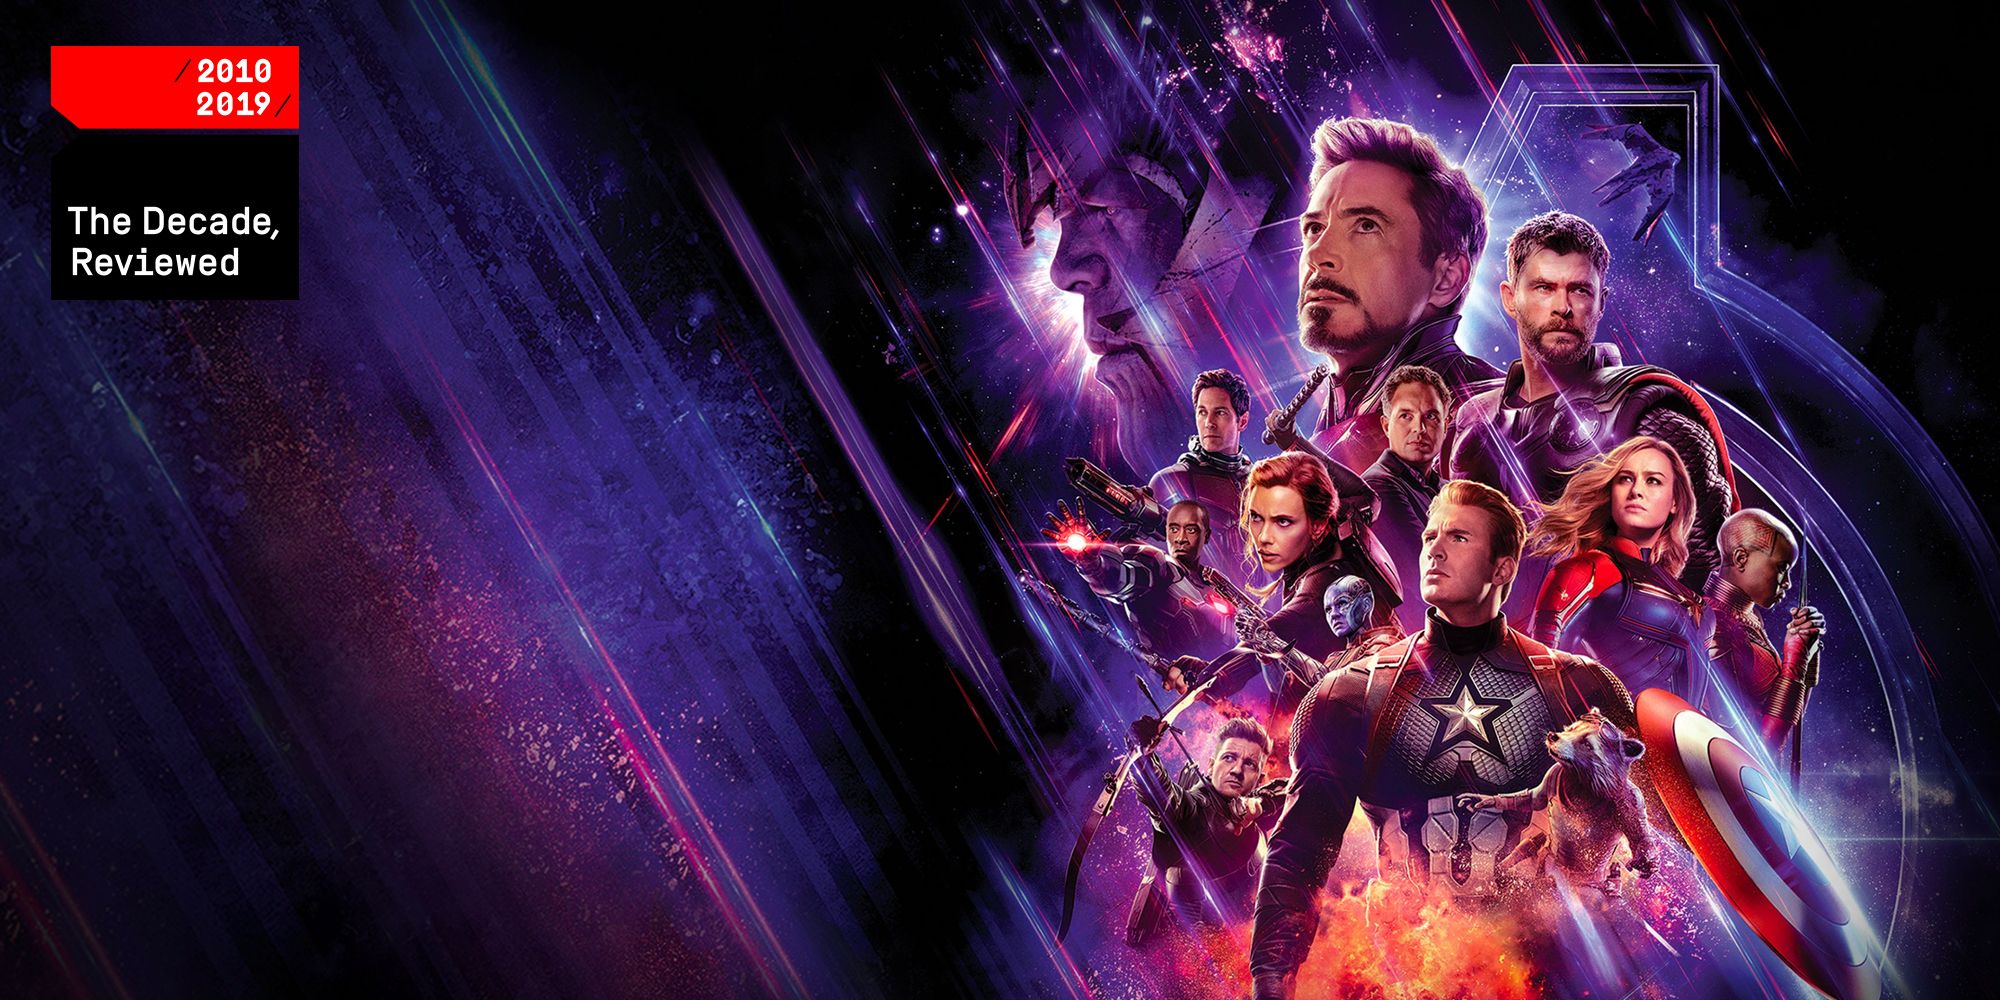 Marvel's Avengers: End Game!. Year ago, when I reviewed Avengers